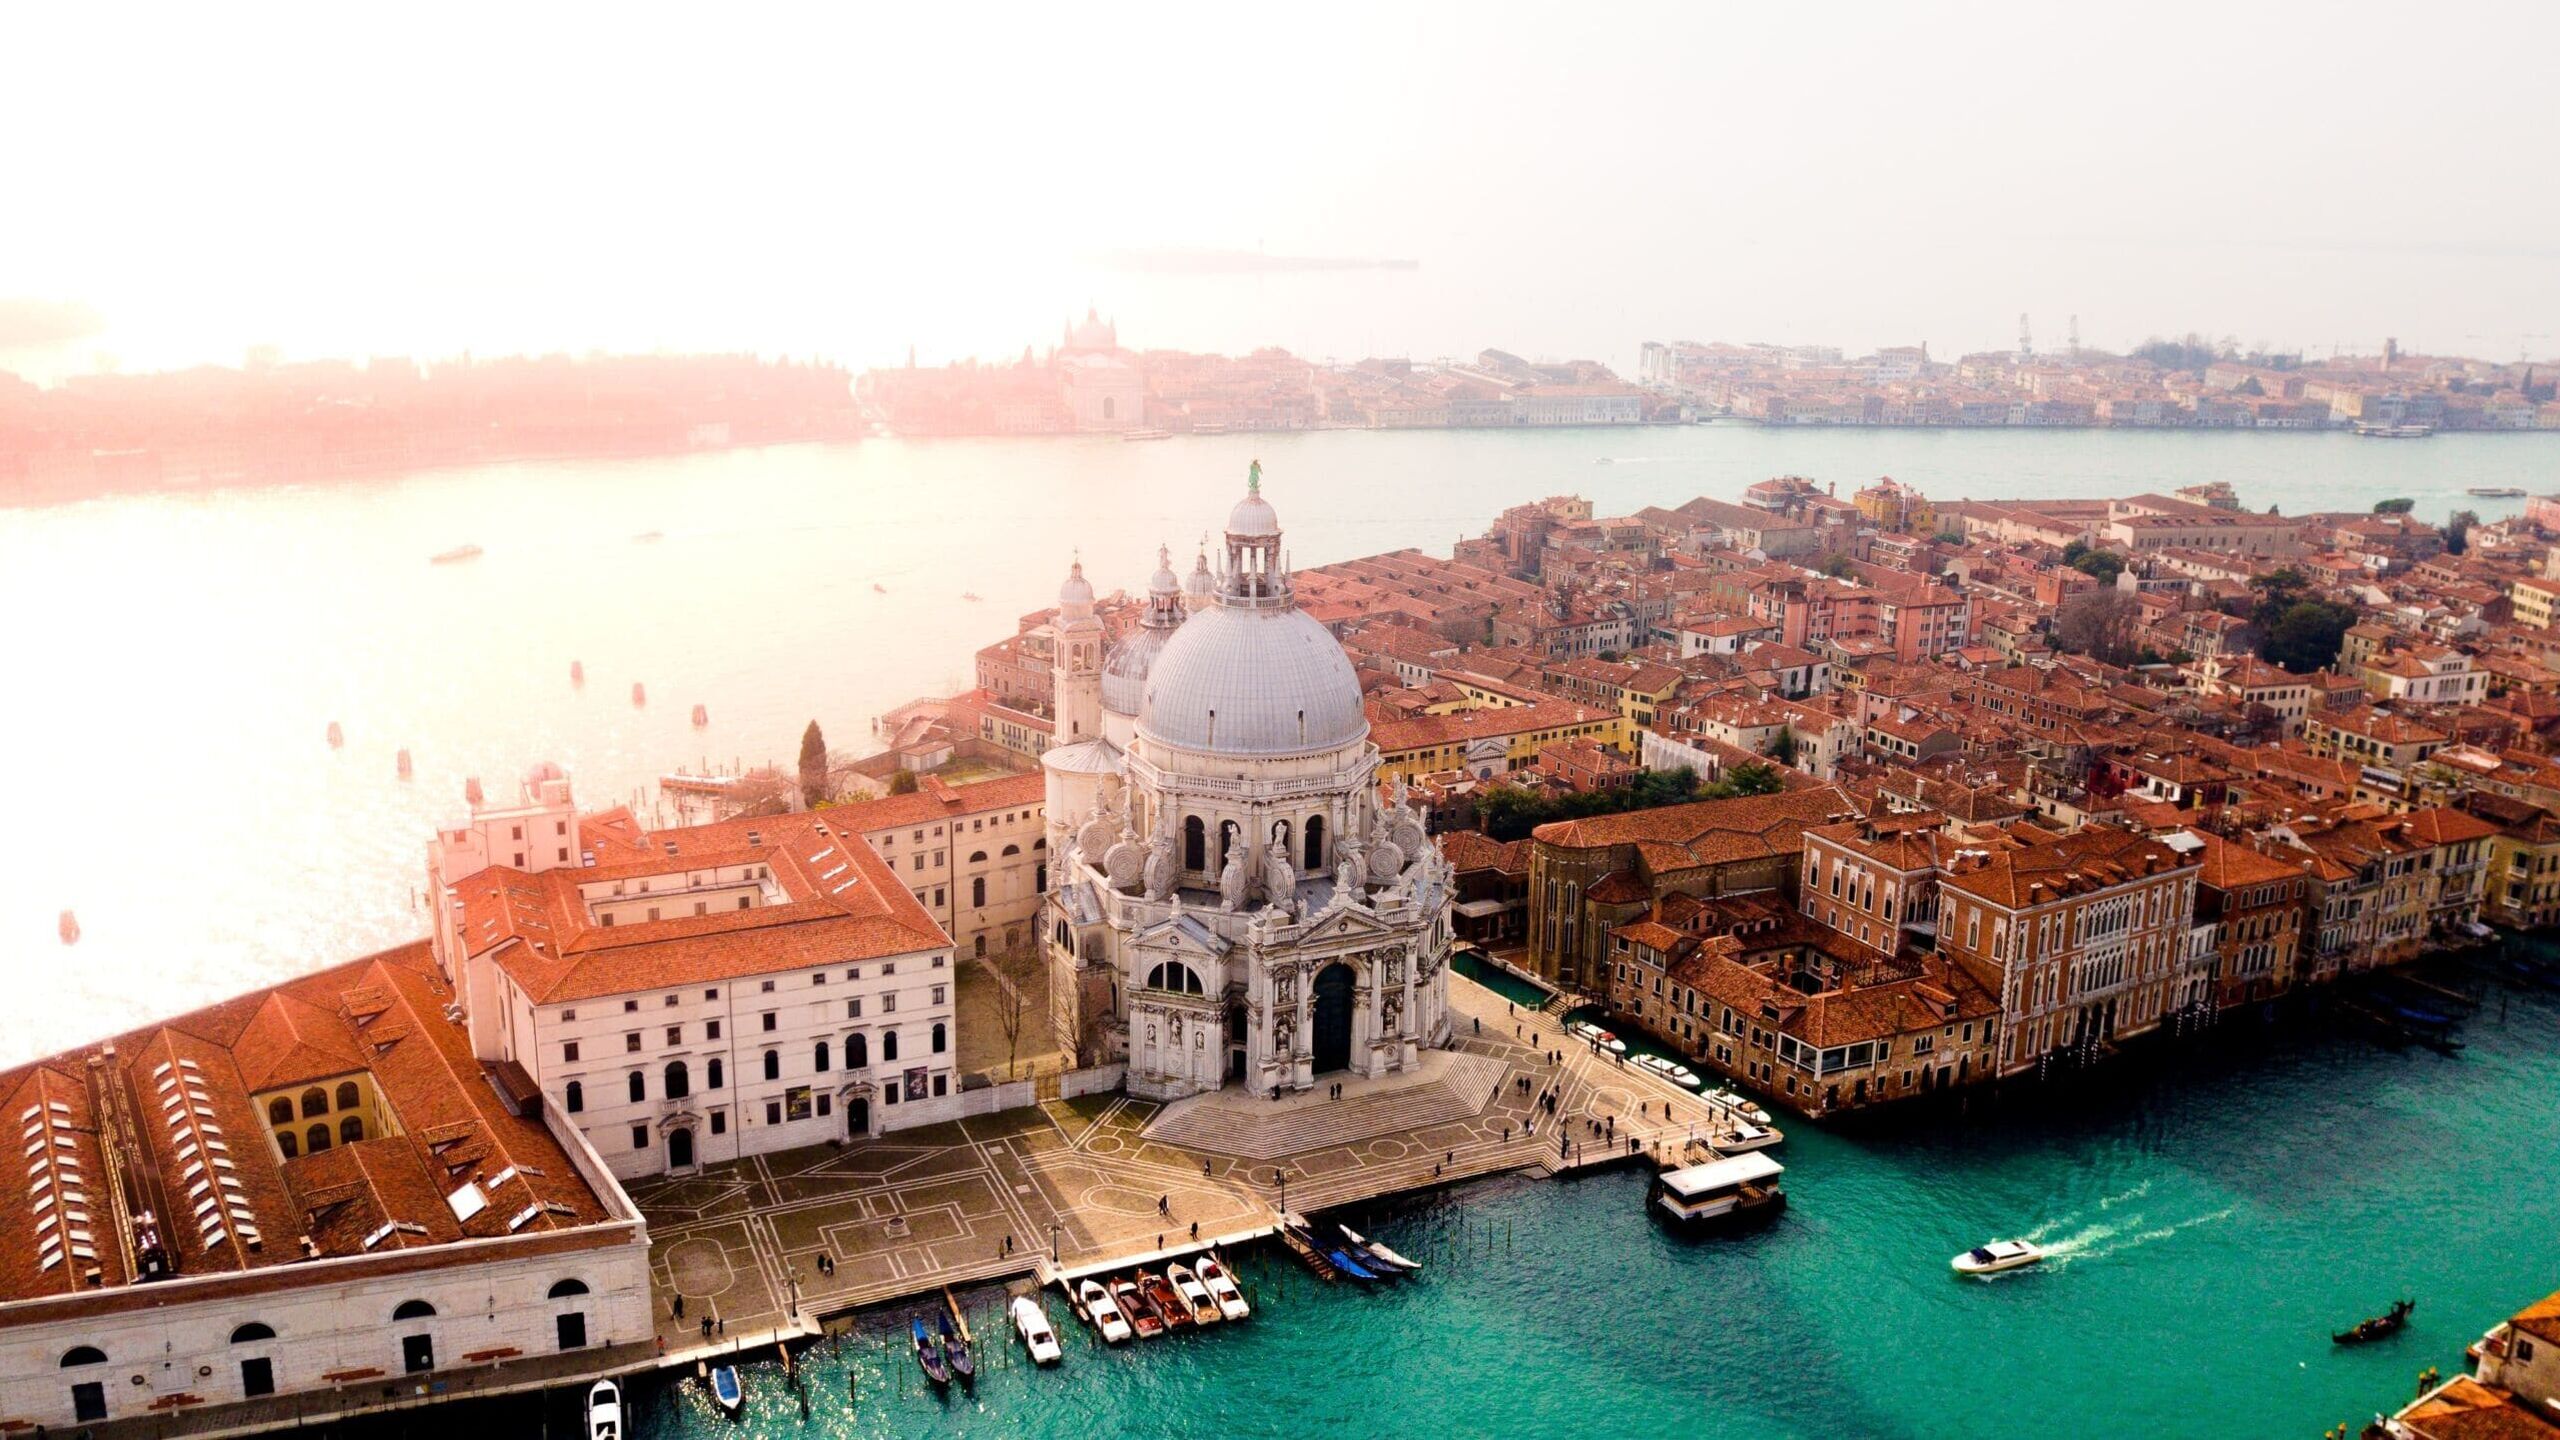 Venice with its beautiful historical monuments